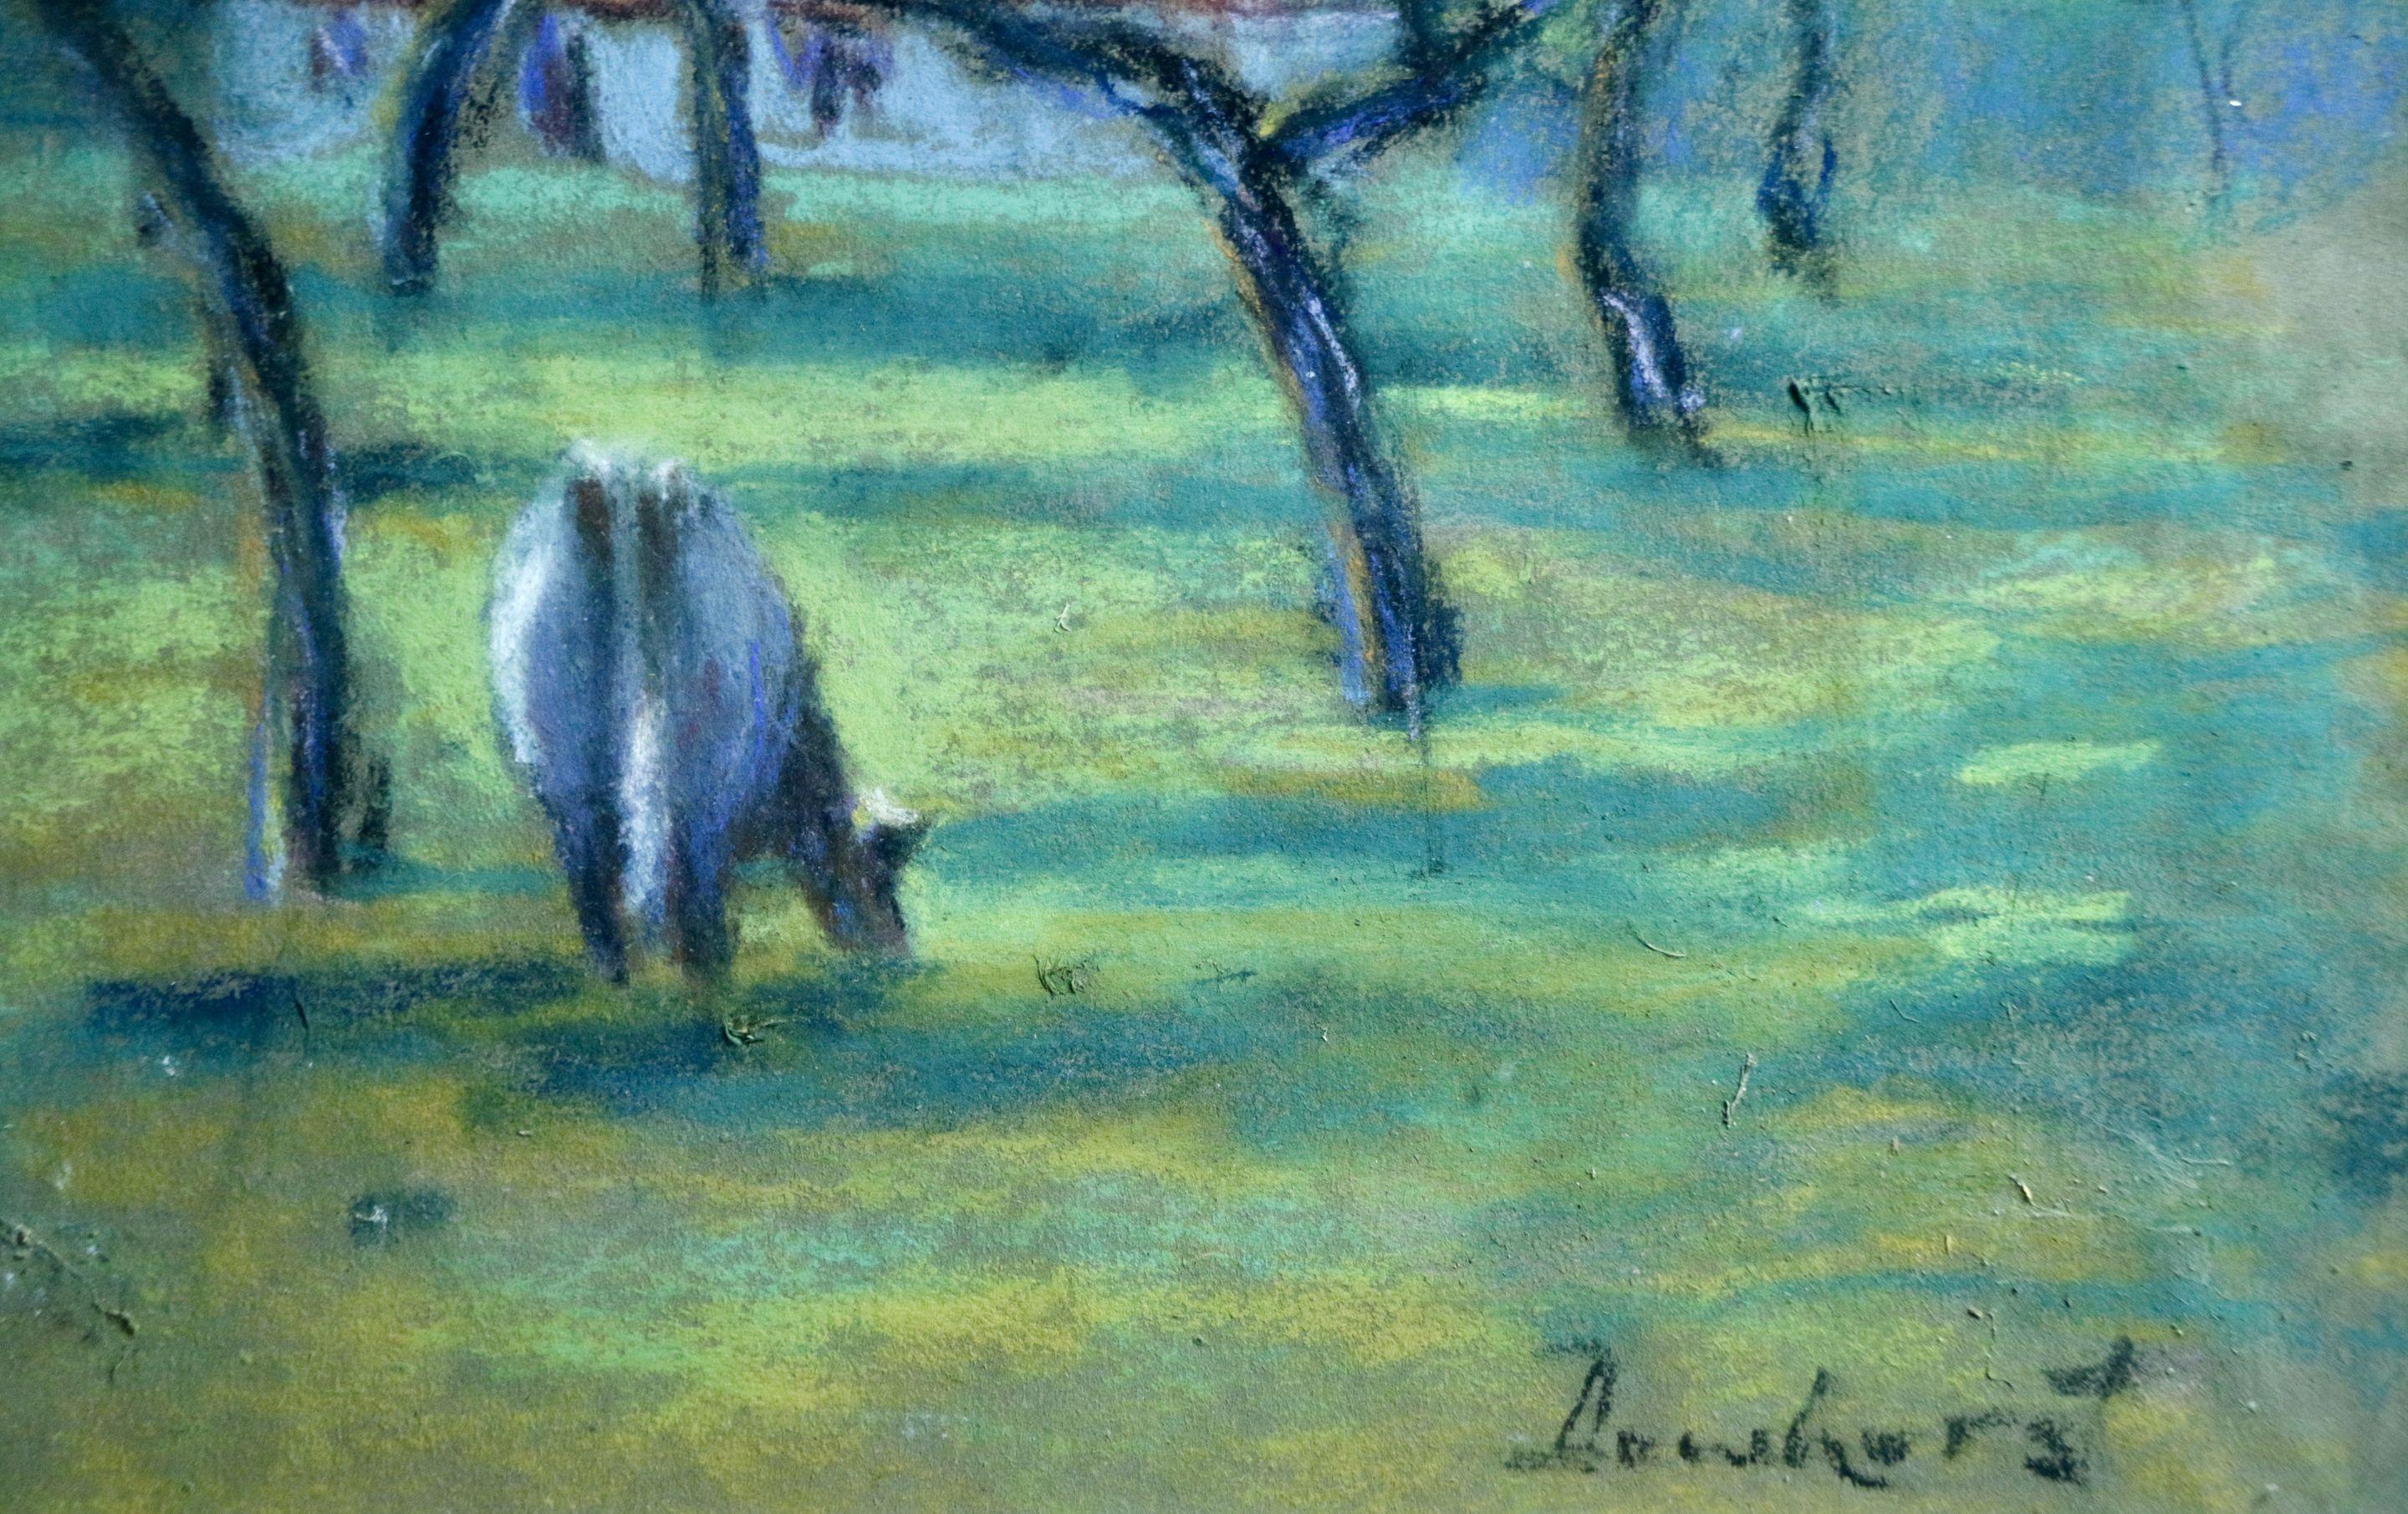 Cattle in an Orchard - 20th Century Pastel, Cow & Trees in Landscape by Dewhurst - Impressionist Art by Wynford Dewhurst